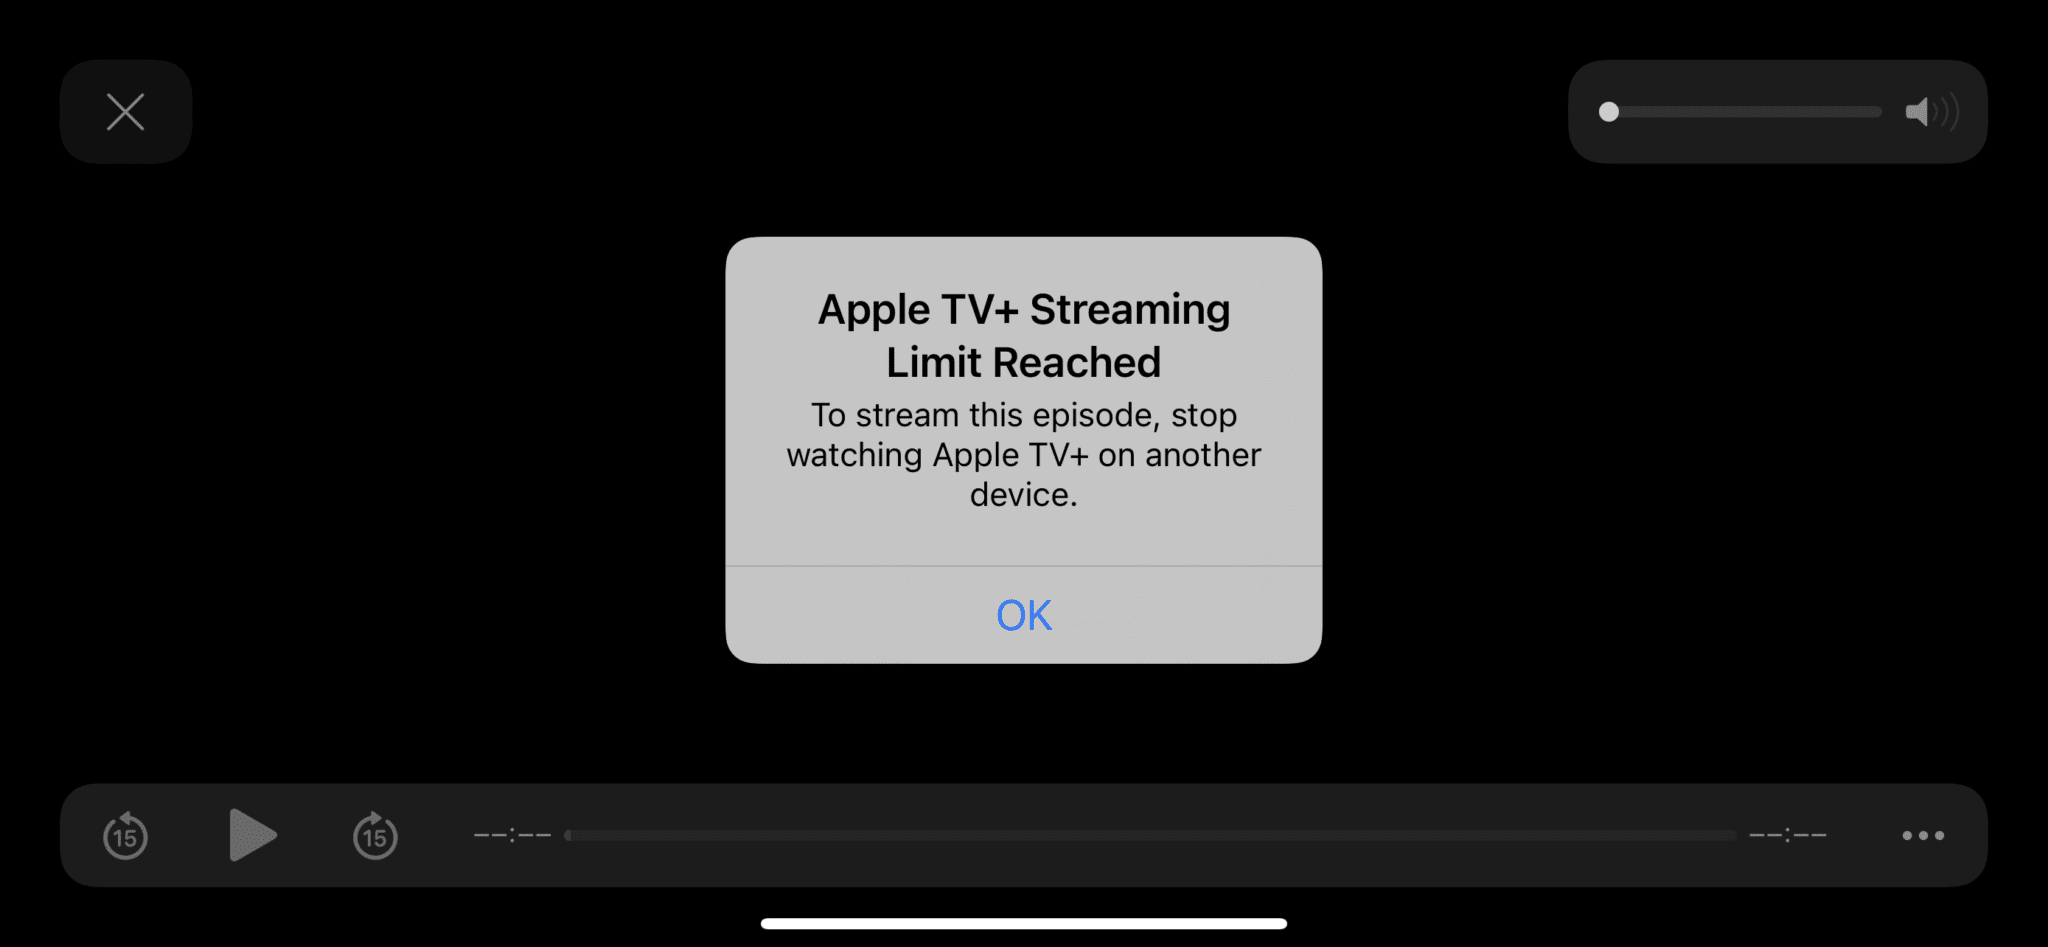 Apple TV+ Streaming Limit Reached error message causing the stream not working, loading, playing, keep buffering issues